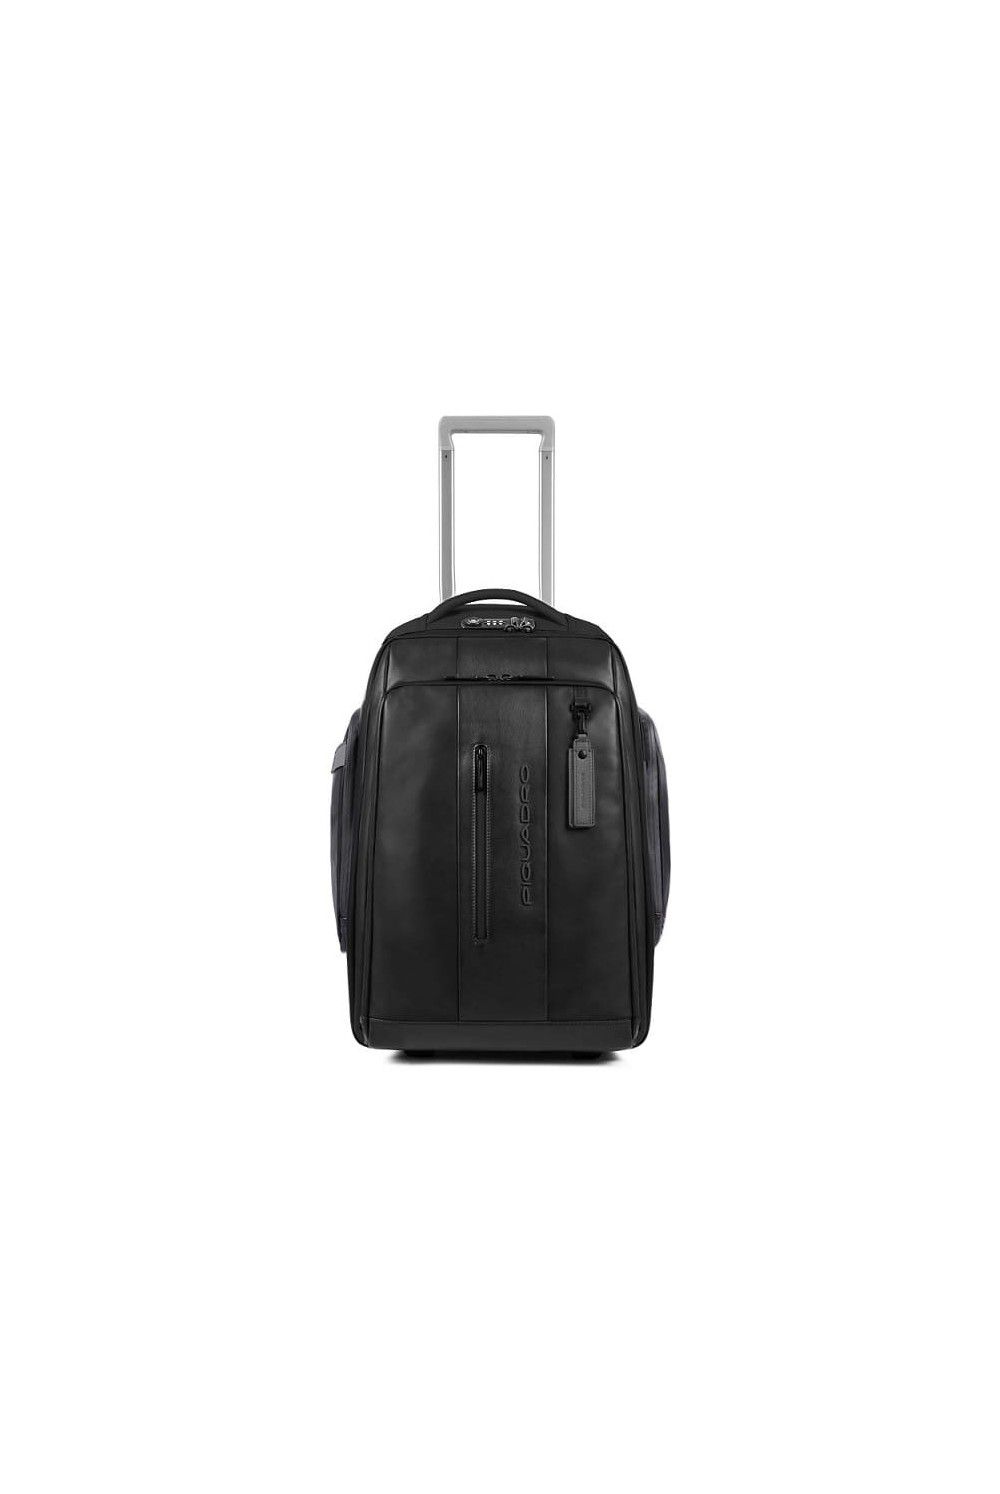 Laptop backpack with wheels Piquadro Urban 15.6 inches made of leather with USB port